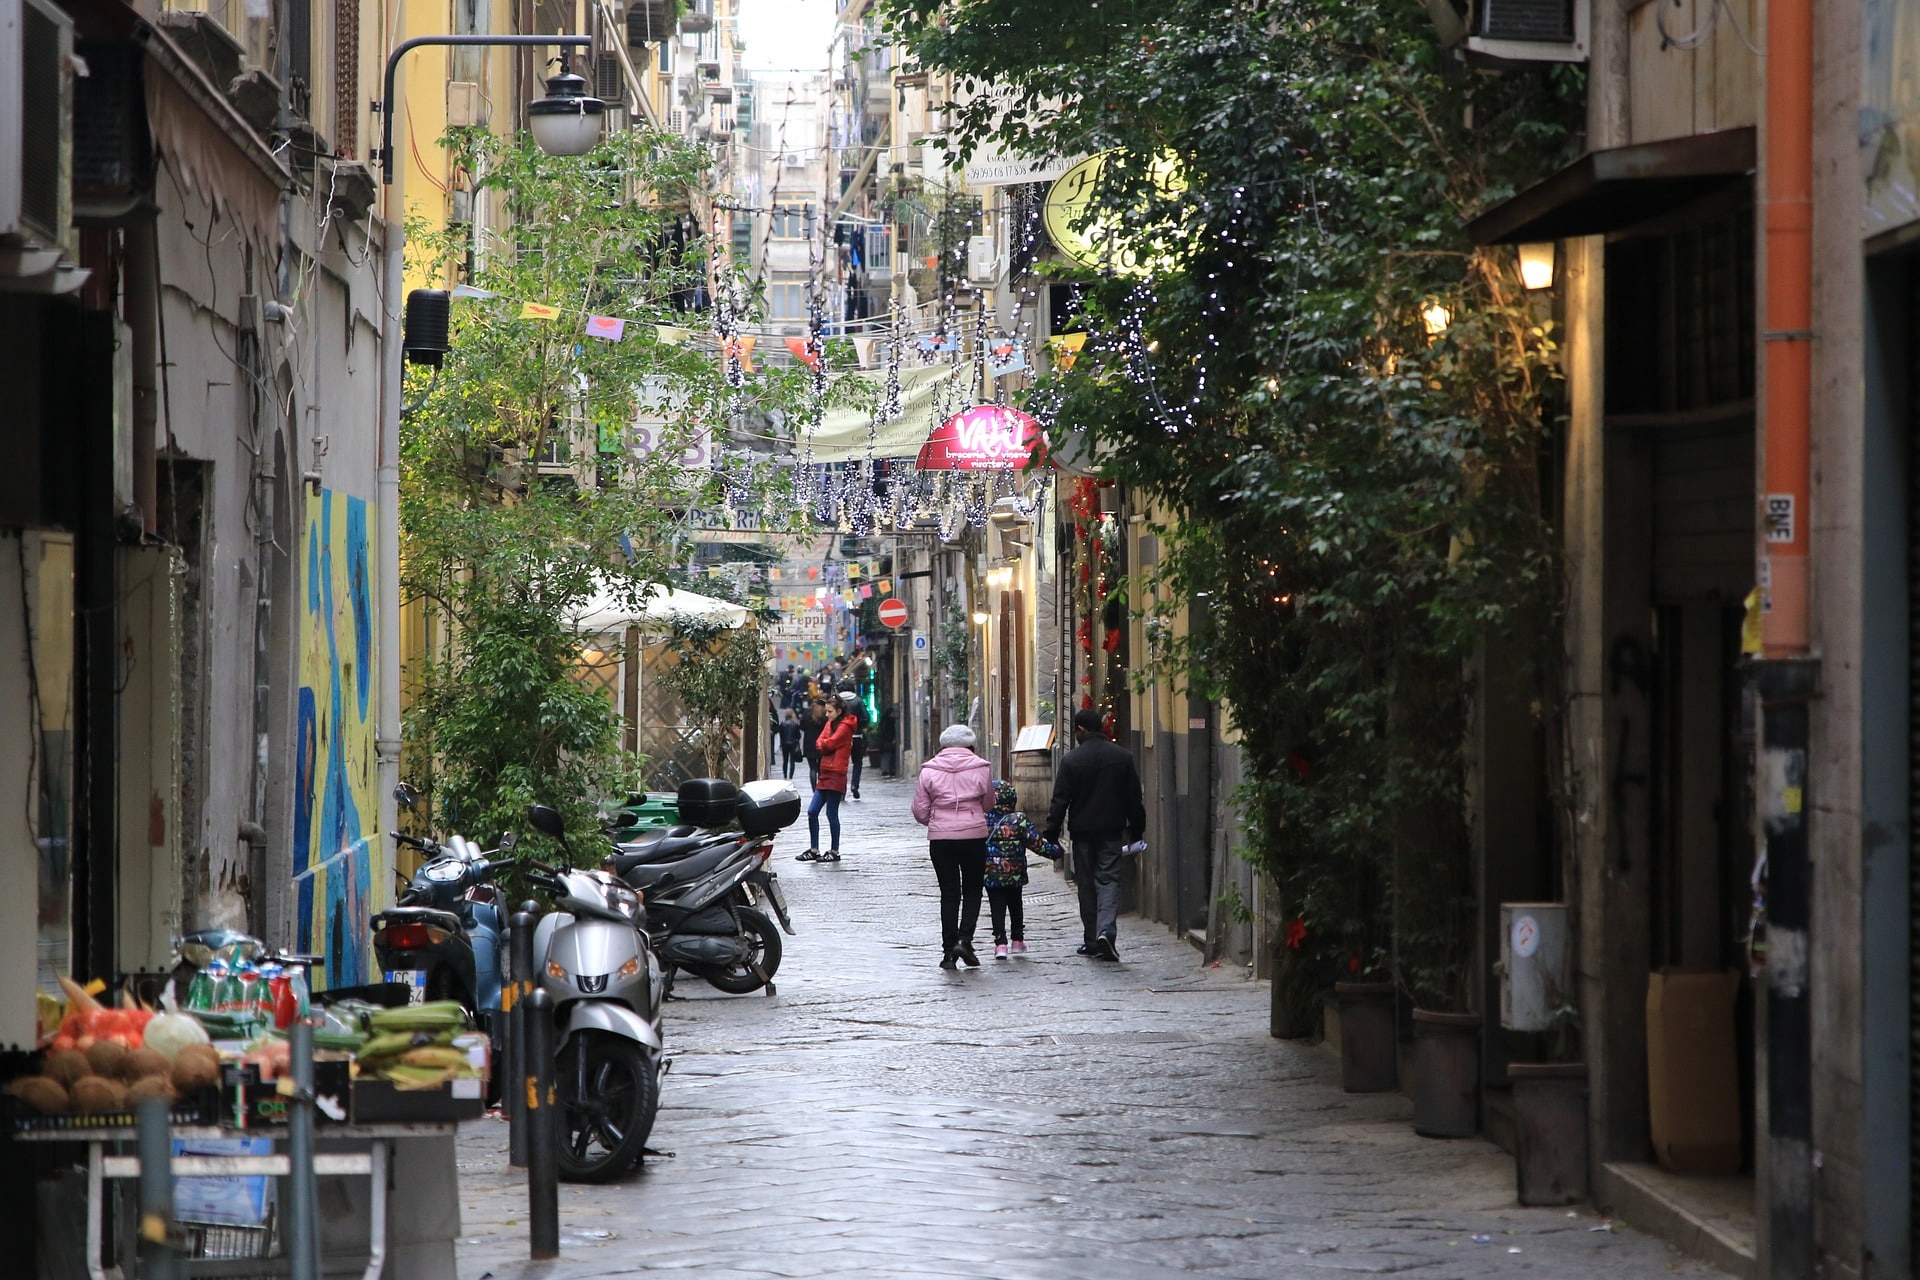 Old Naples street - Campania guide